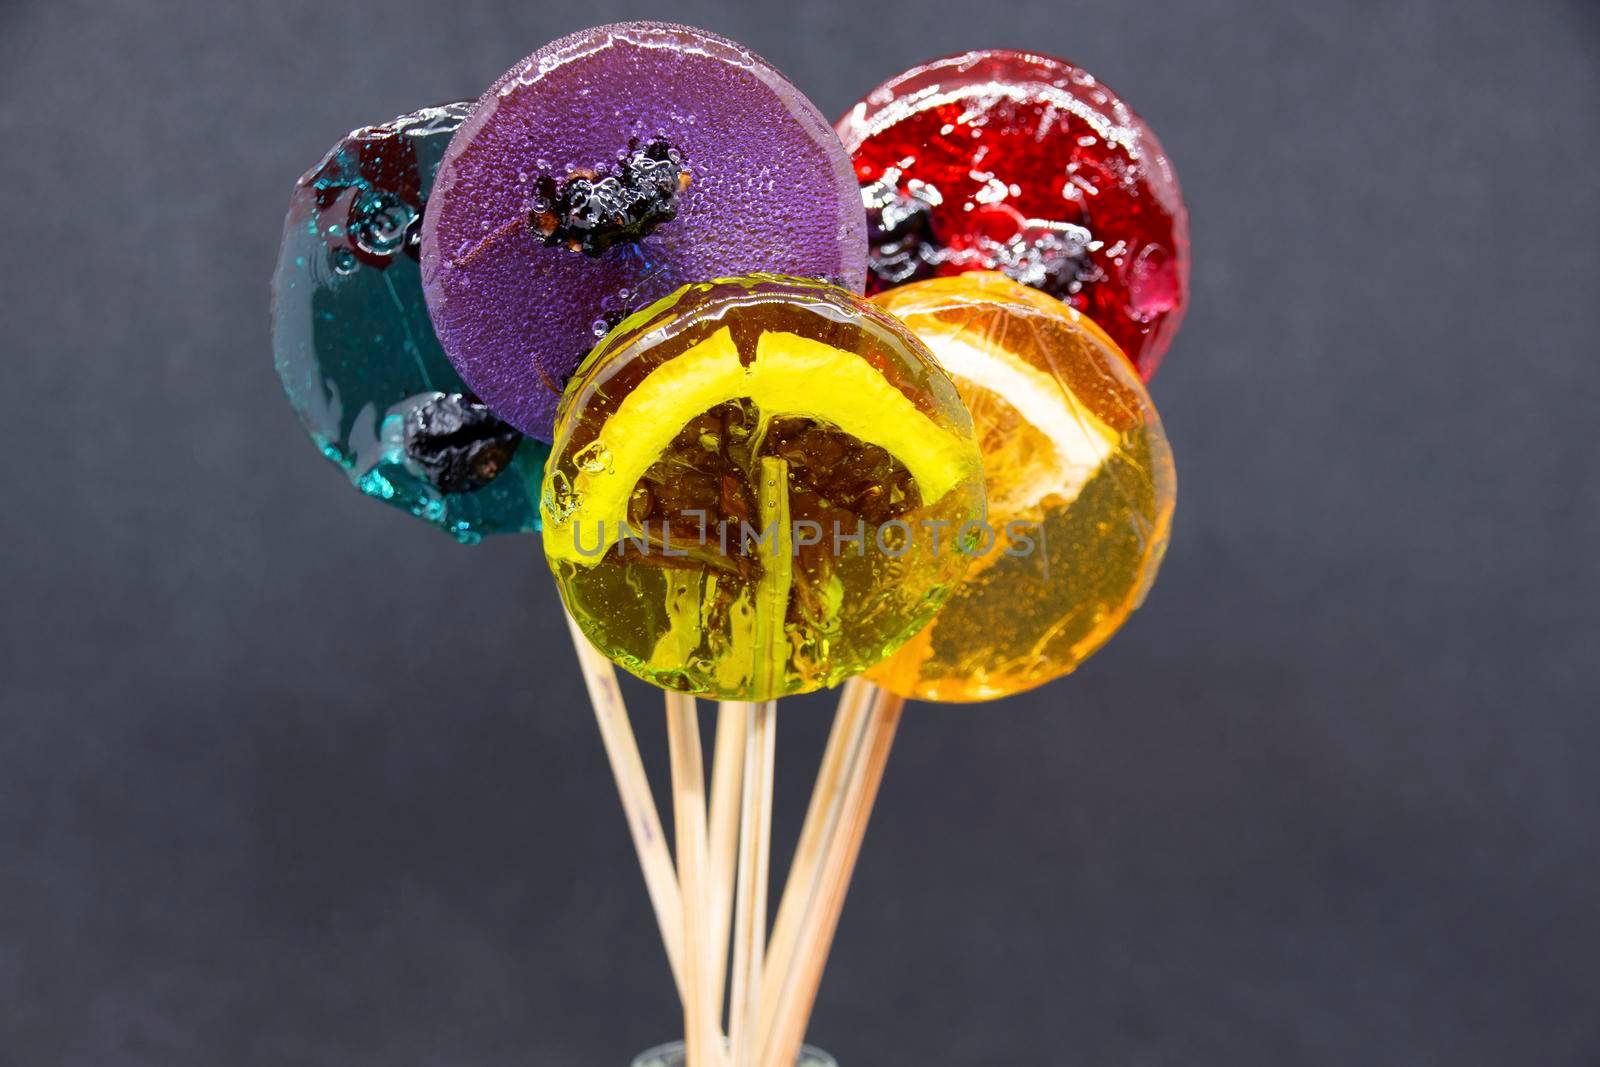 Colored lollipops with different berries and fruits inside close-up on a gray background.